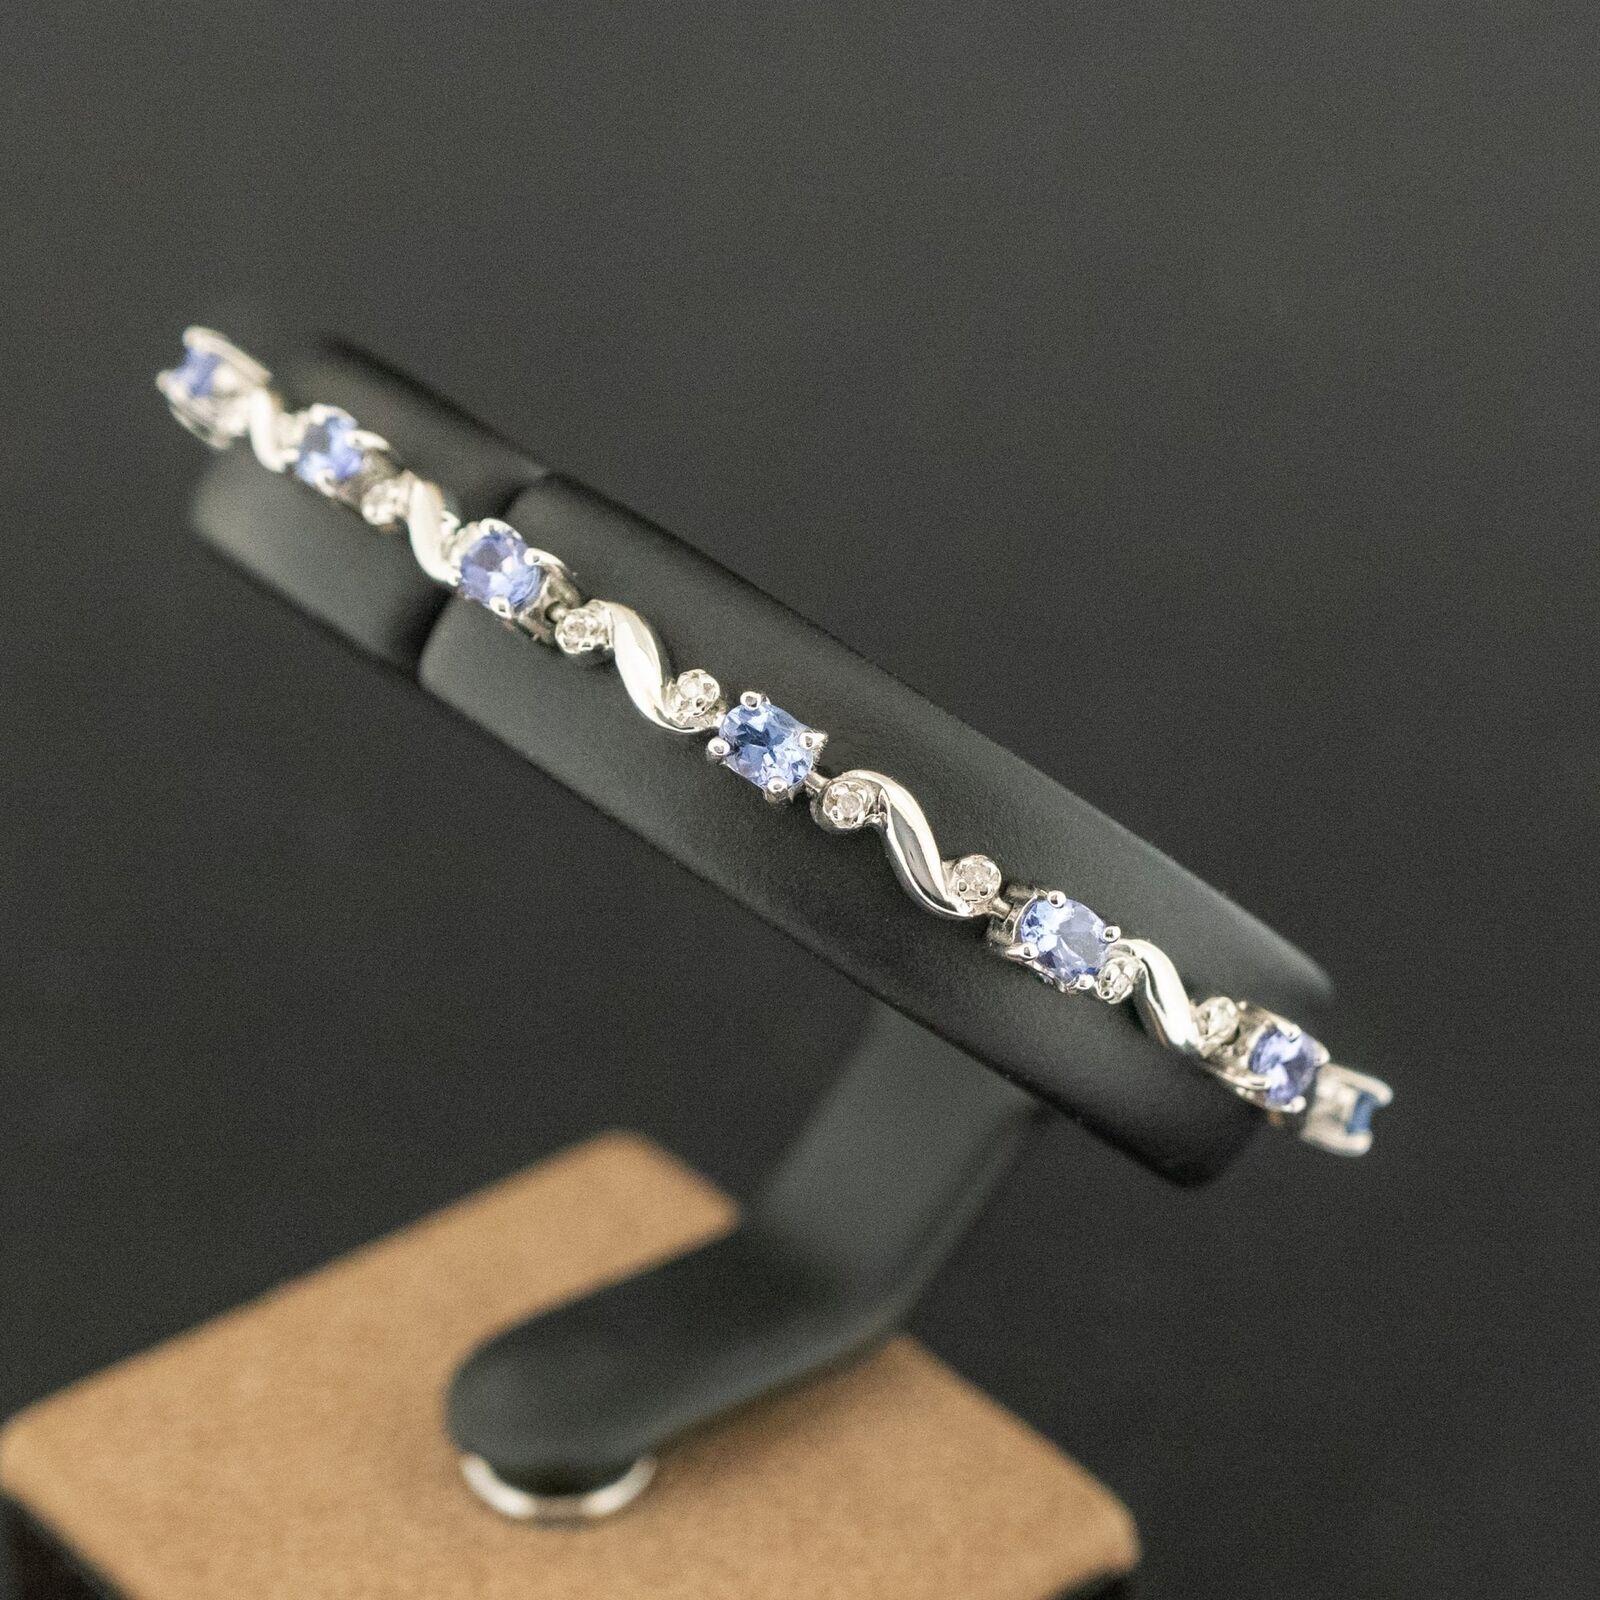 Condition: Pre-owned. Good with mild/light scratches
Material: 14ct White Gold
Hallmarked: Stamped 14K. Tests as 14ct
Main Stone Identity:  Tanzanite
Main Stone Colour:  Purple/Blue
Main Stone Total Carat Weight:  Approx. 2.17ct
Secondary Stone